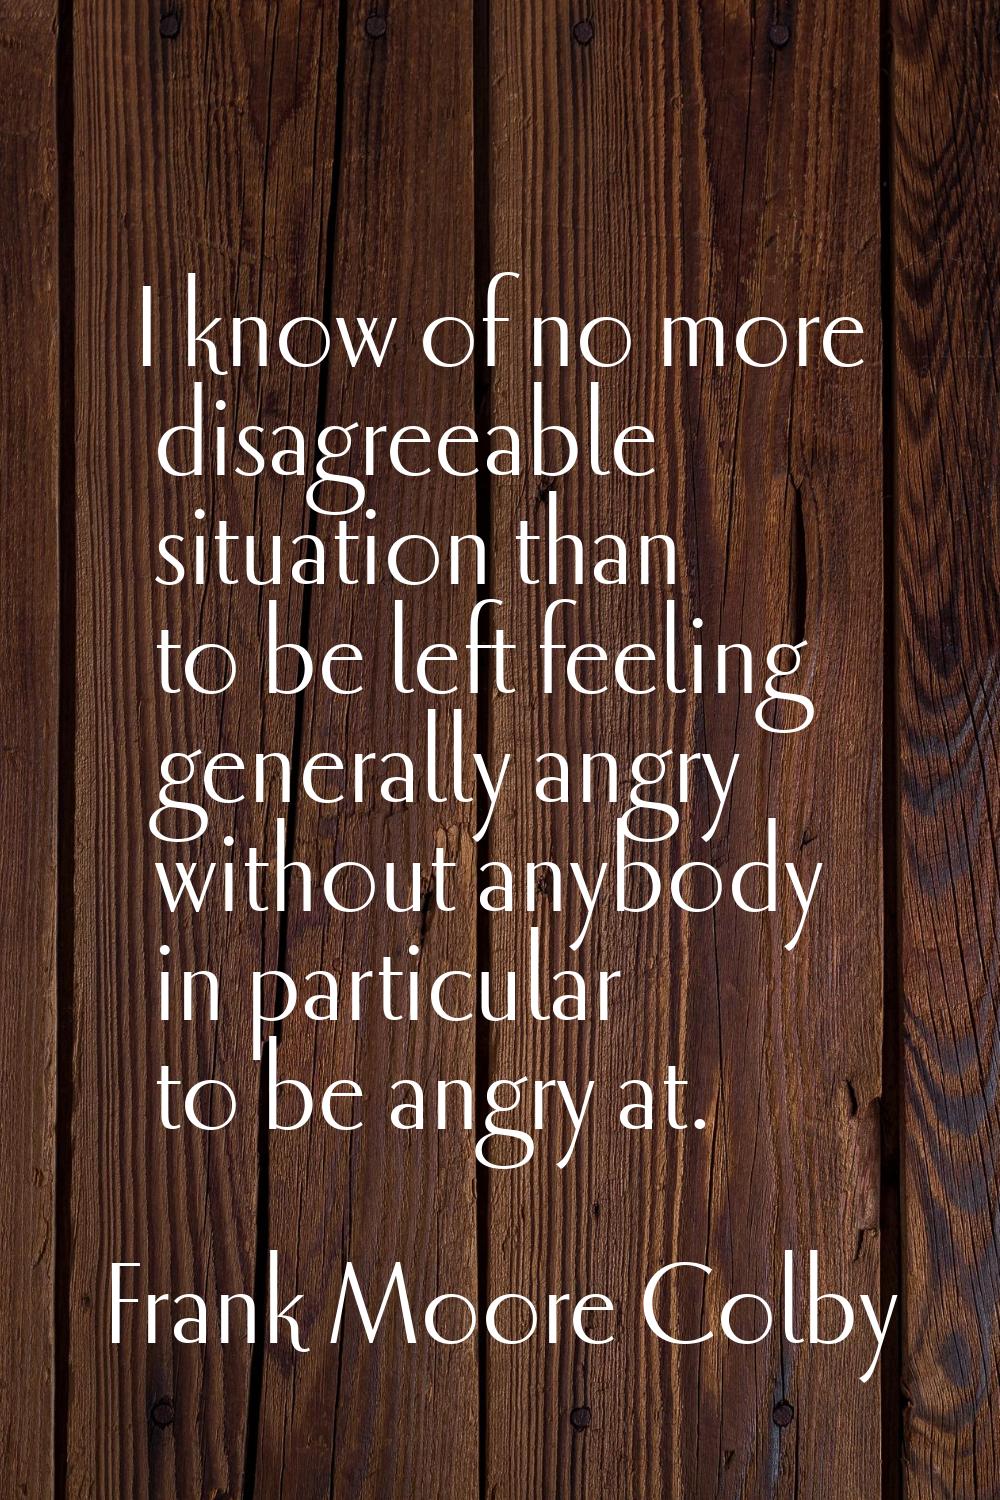 I know of no more disagreeable situation than to be left feeling generally angry without anybody in